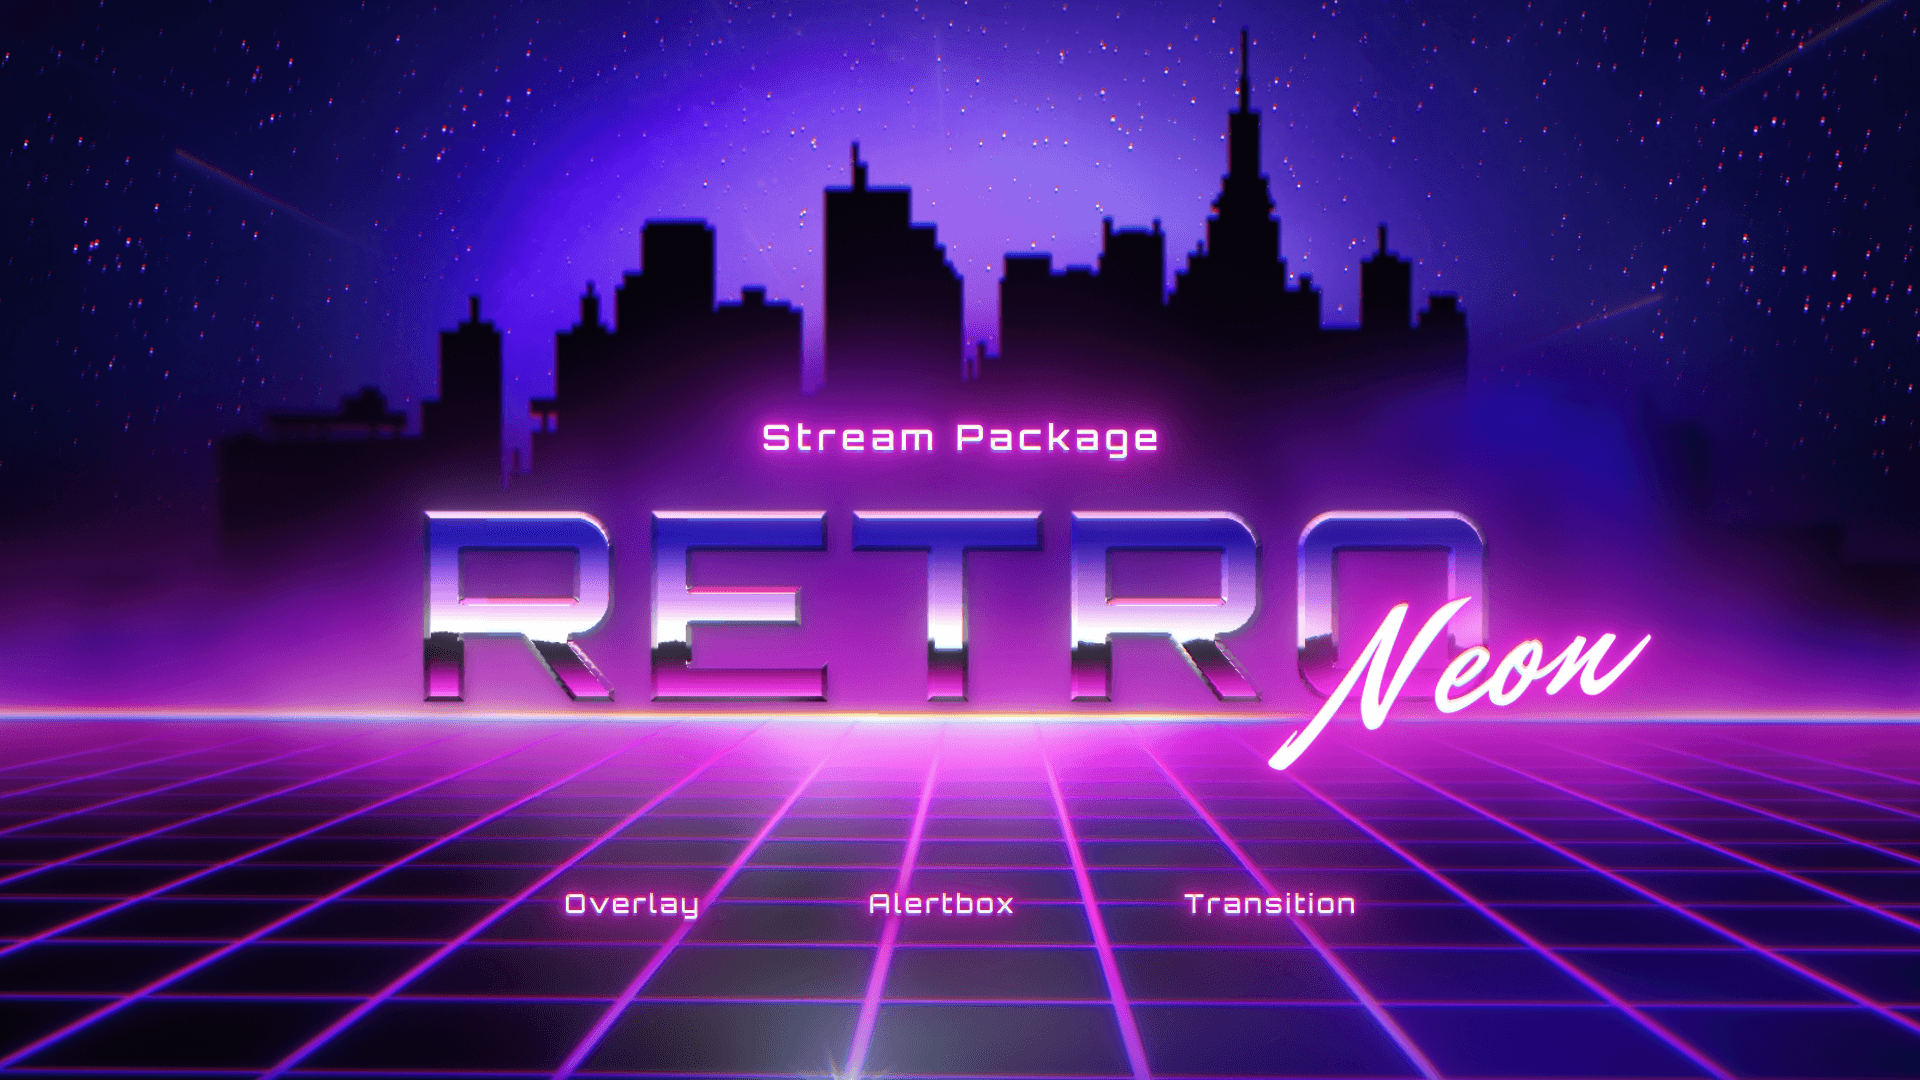 Retro Neon Animated Stream Package with Overlays, Alerts and Transition for Twitch and OBS Studio